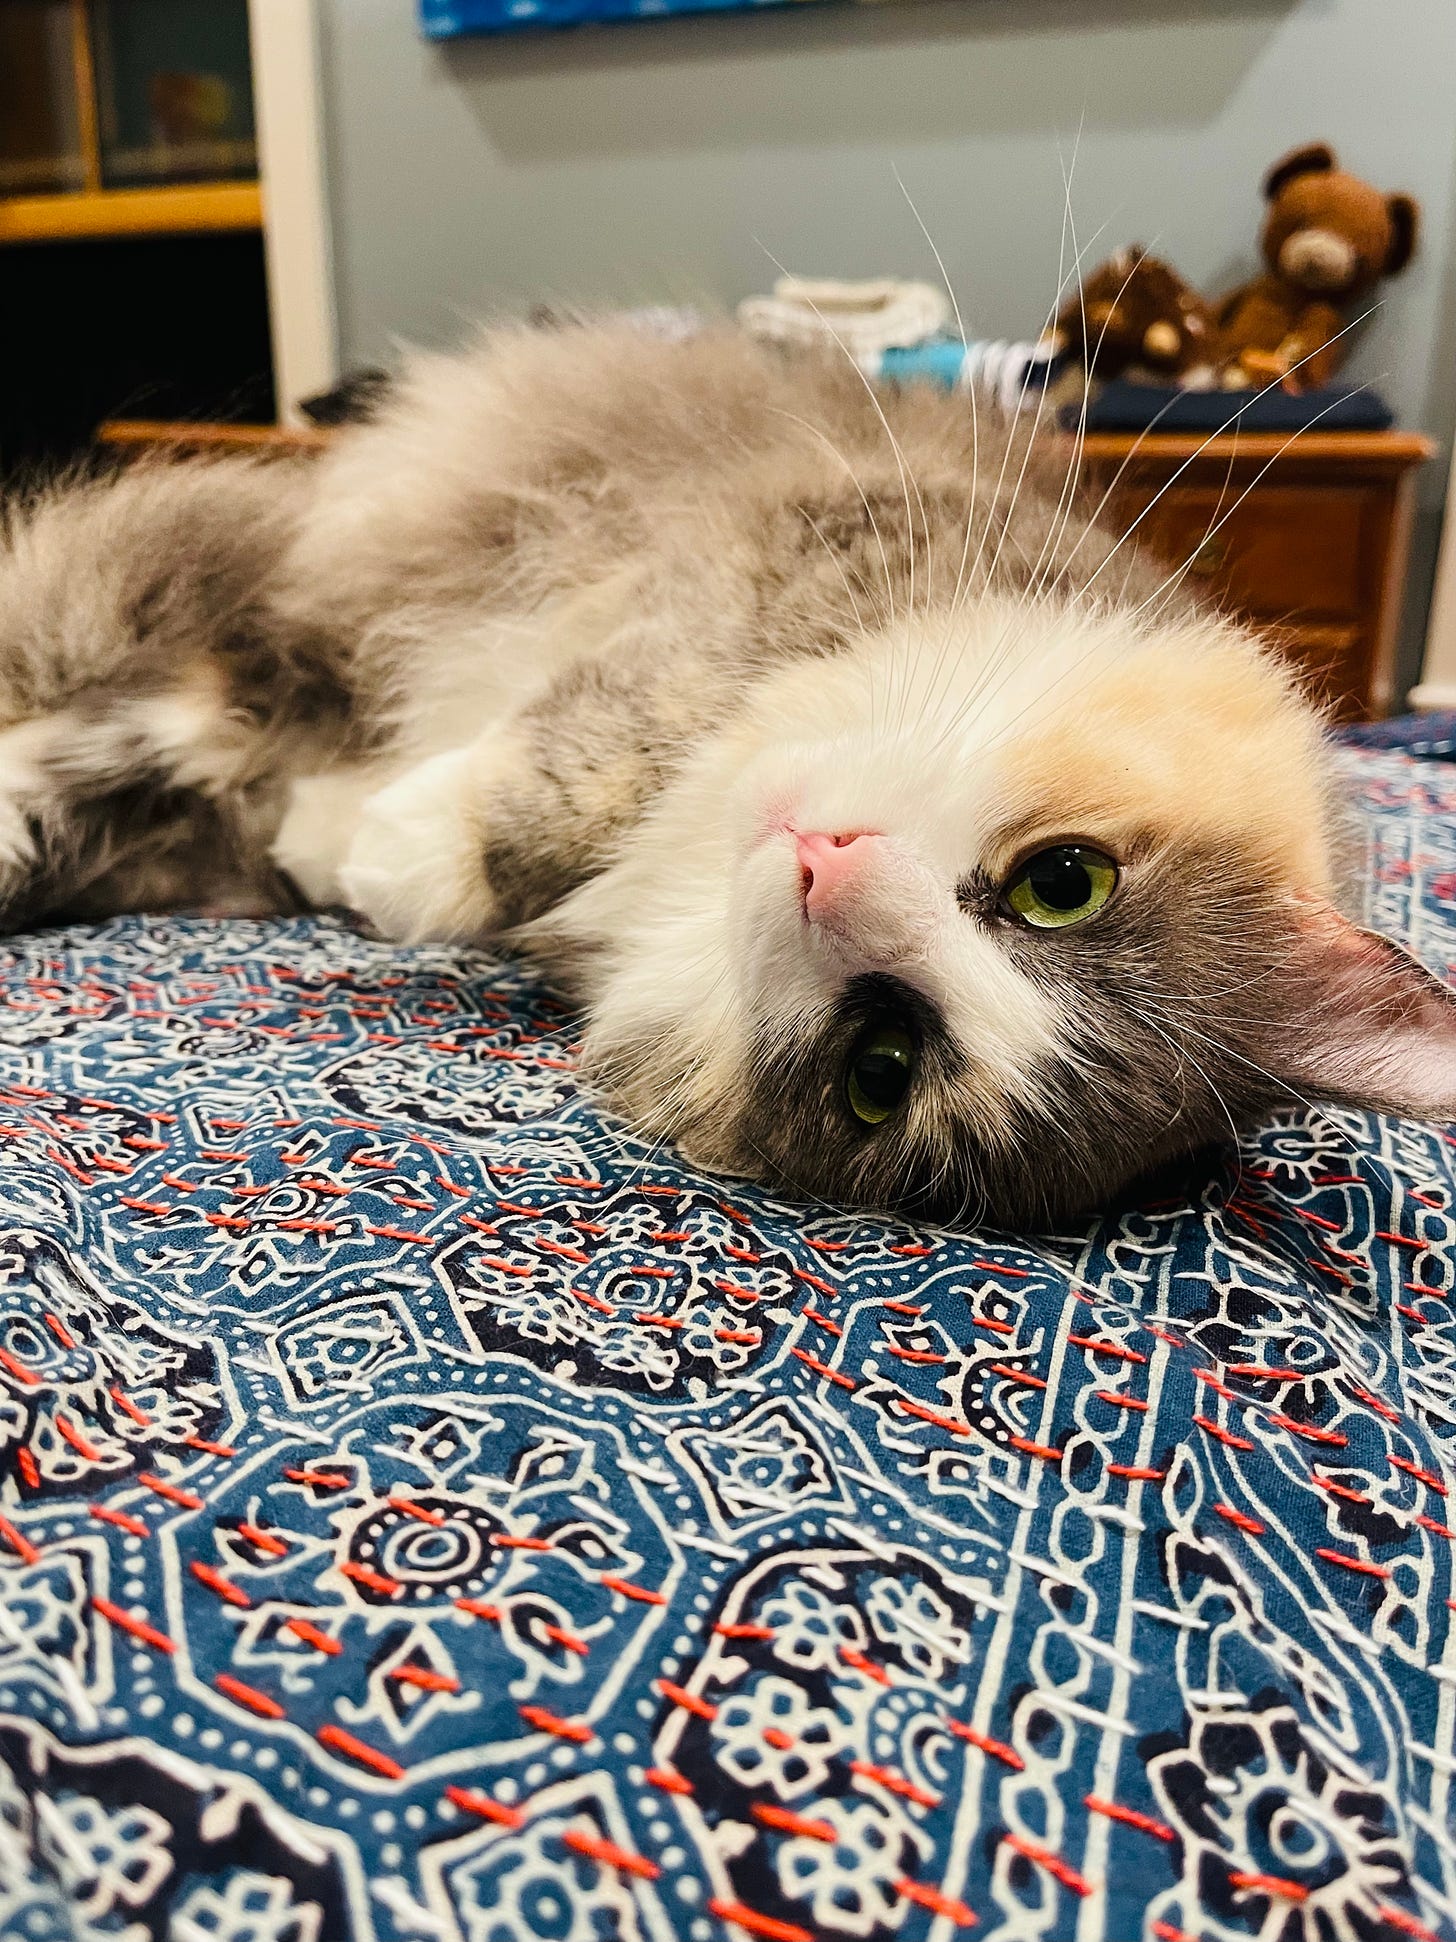 Adorable upside down cat on a bed